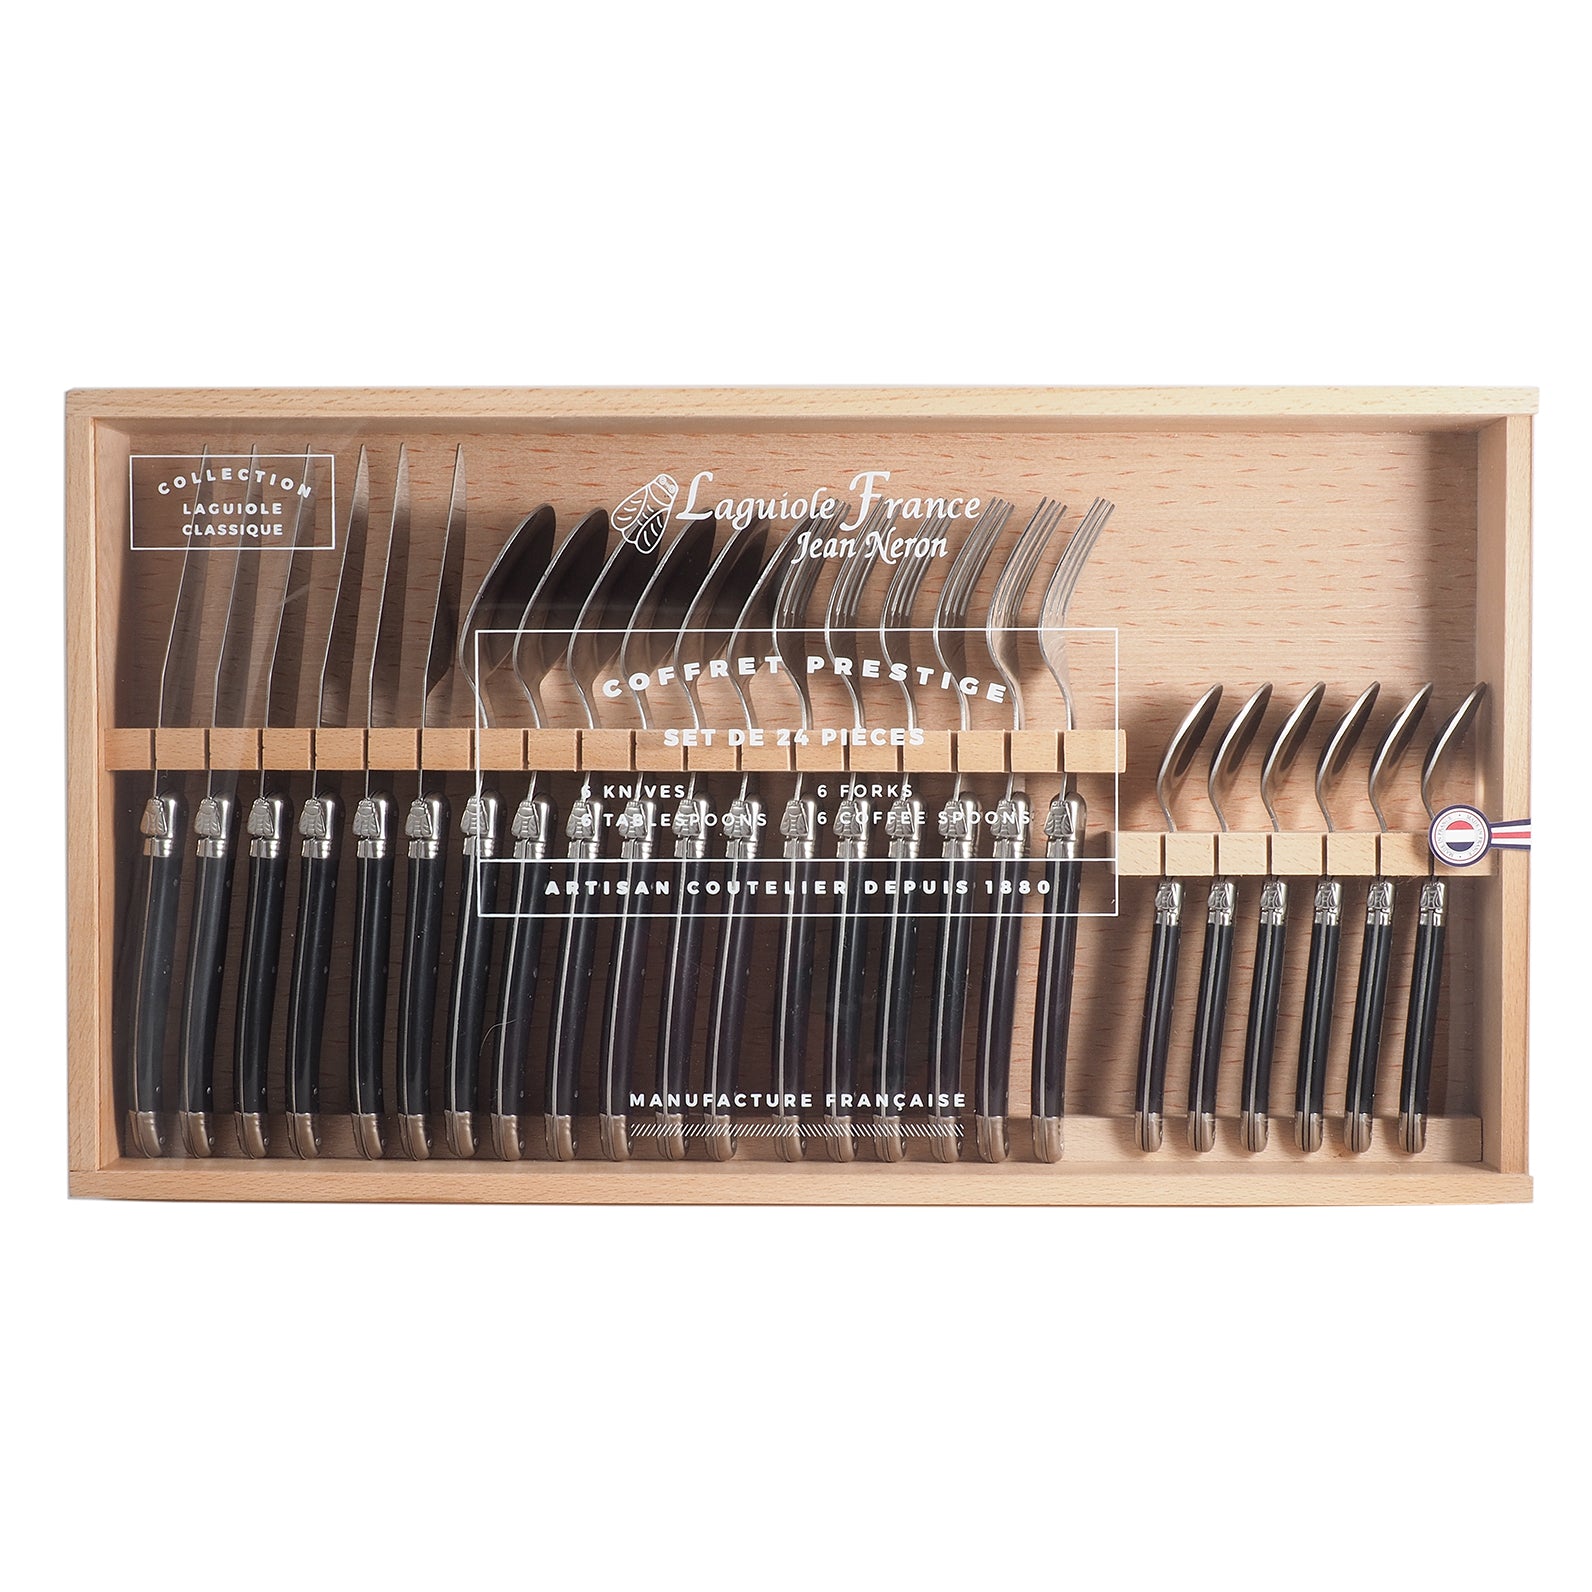 Laguiole Black Flatware in Wooden Box with Acrylic Lid (Set of 24) Cutlery Set Laguiole Brand_Laguiole Knife Sets Laguiole Spring Collection 7900-54000W_BLK_AL-Laguiole-Black-Flatware-in-Wooden-Box-with-Acrylic-Lid-_Set-of-24